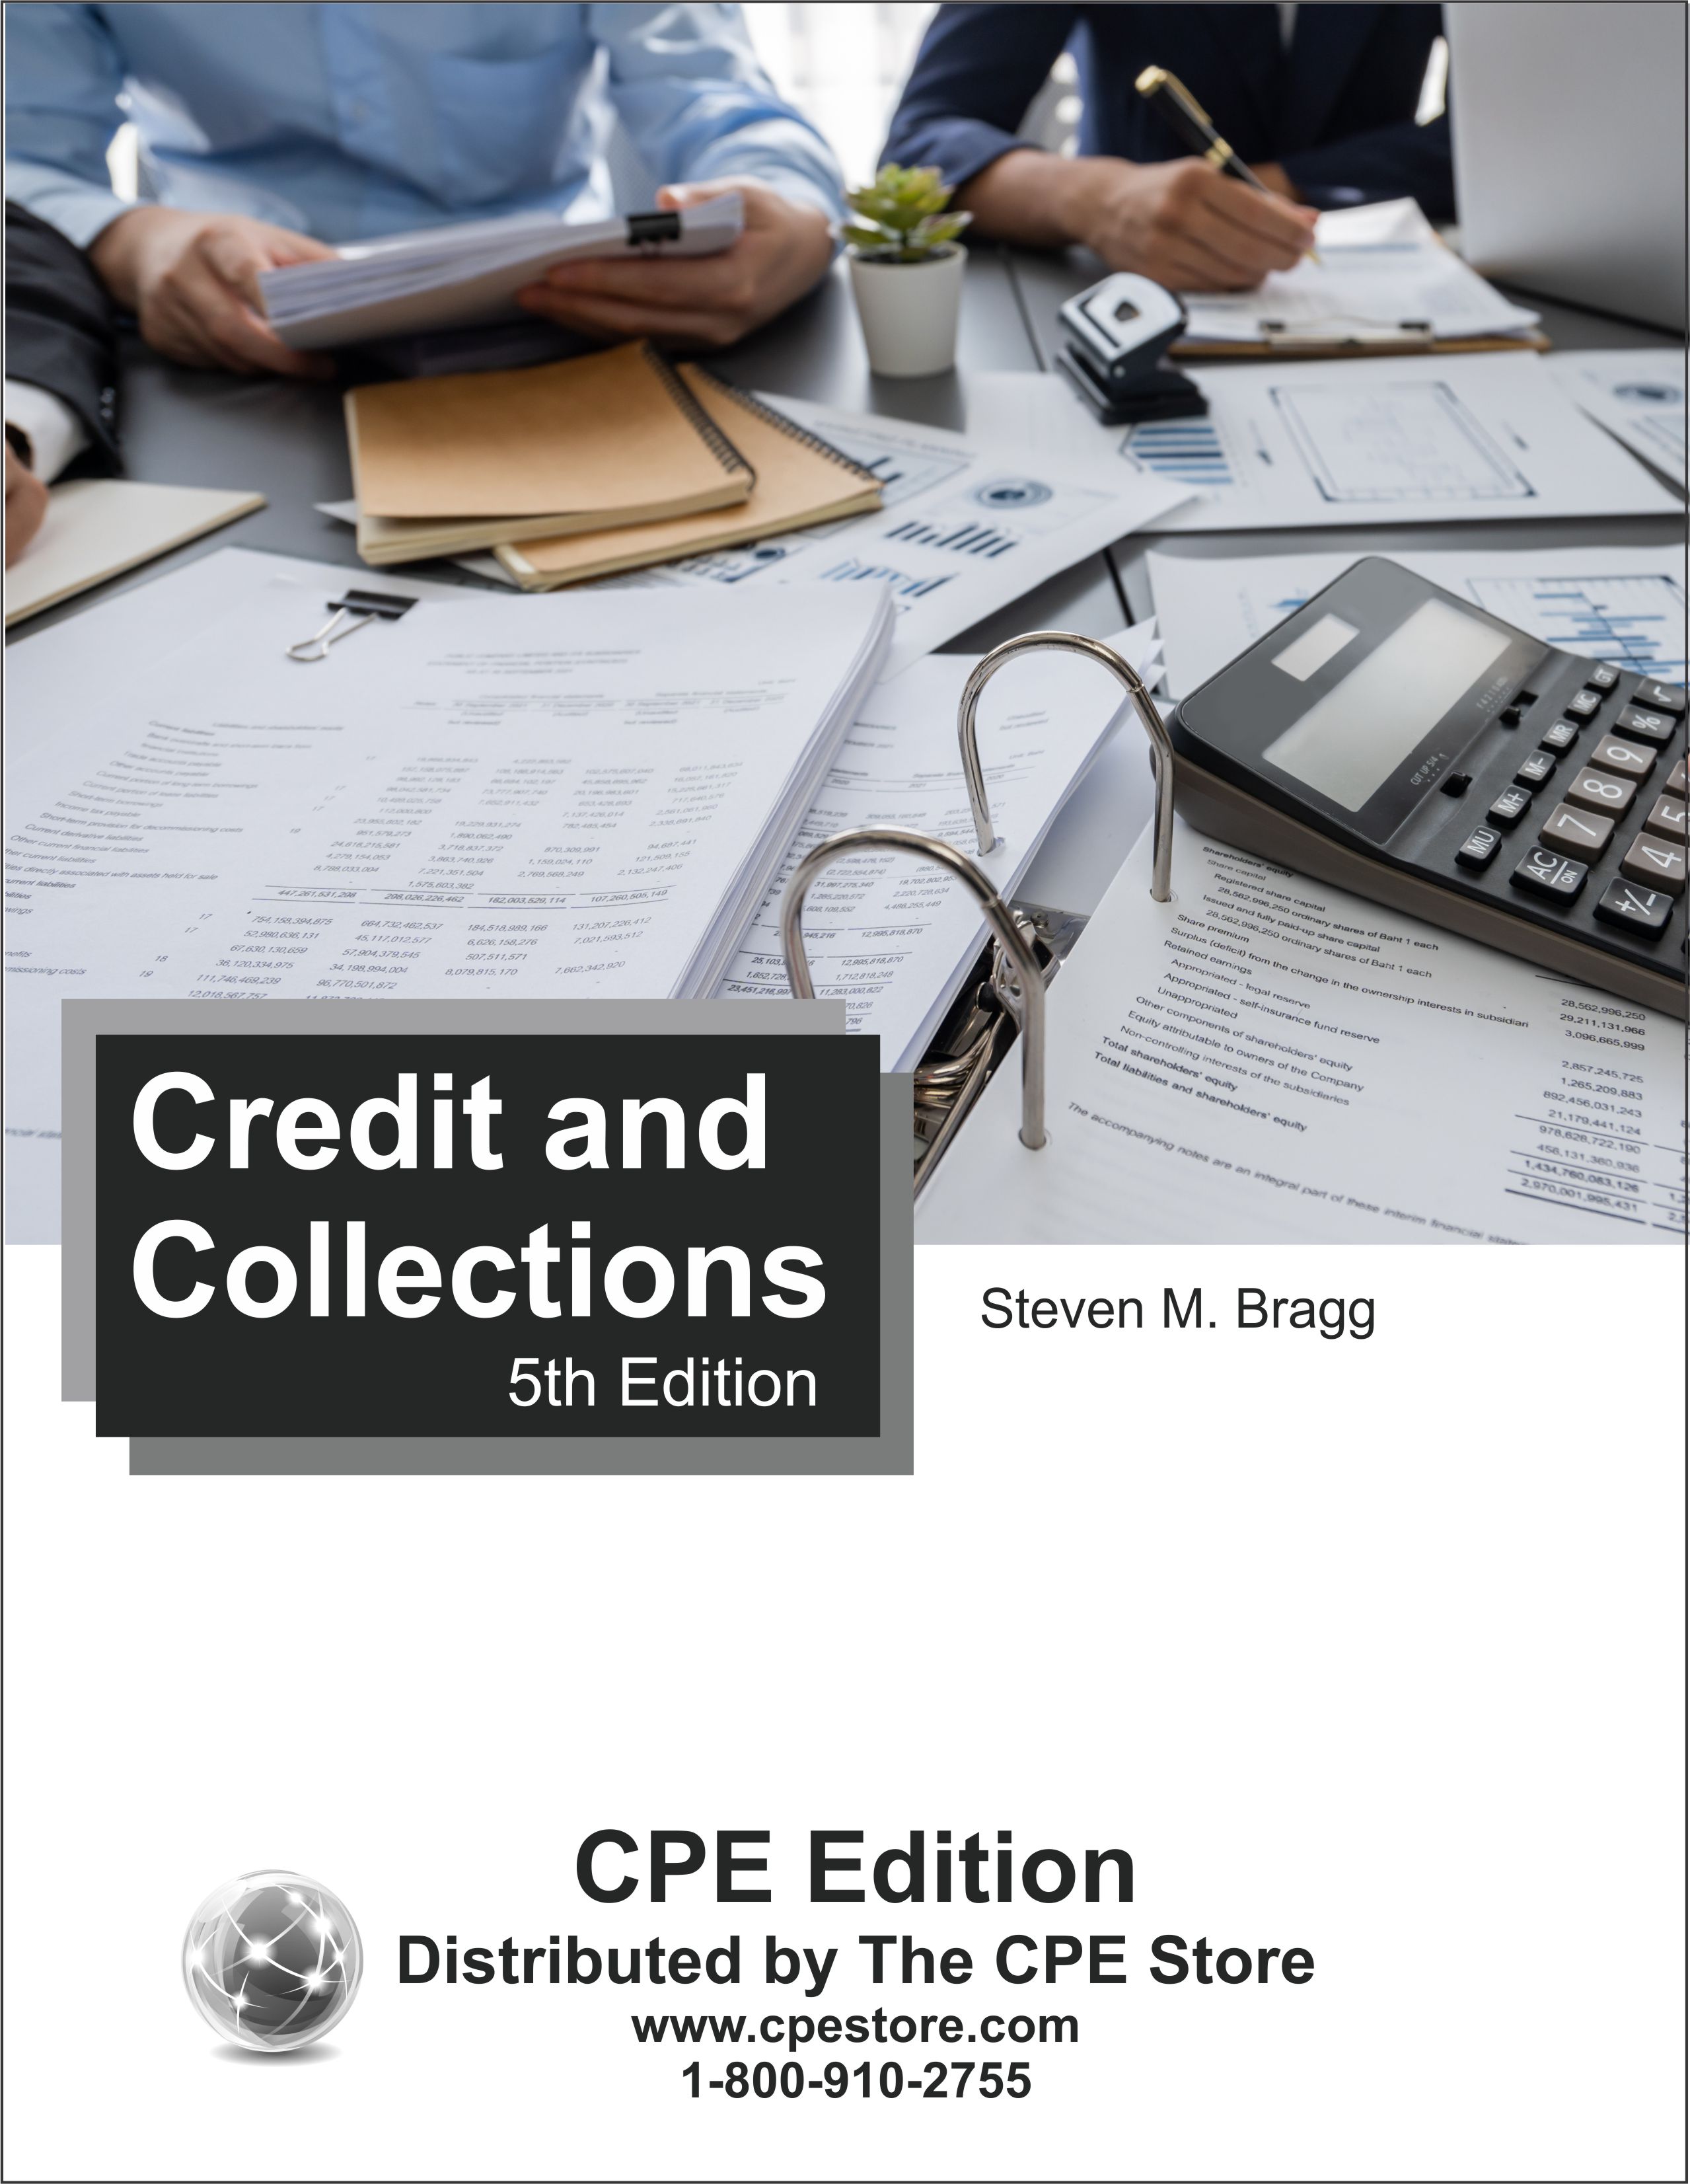 Credit and Collections